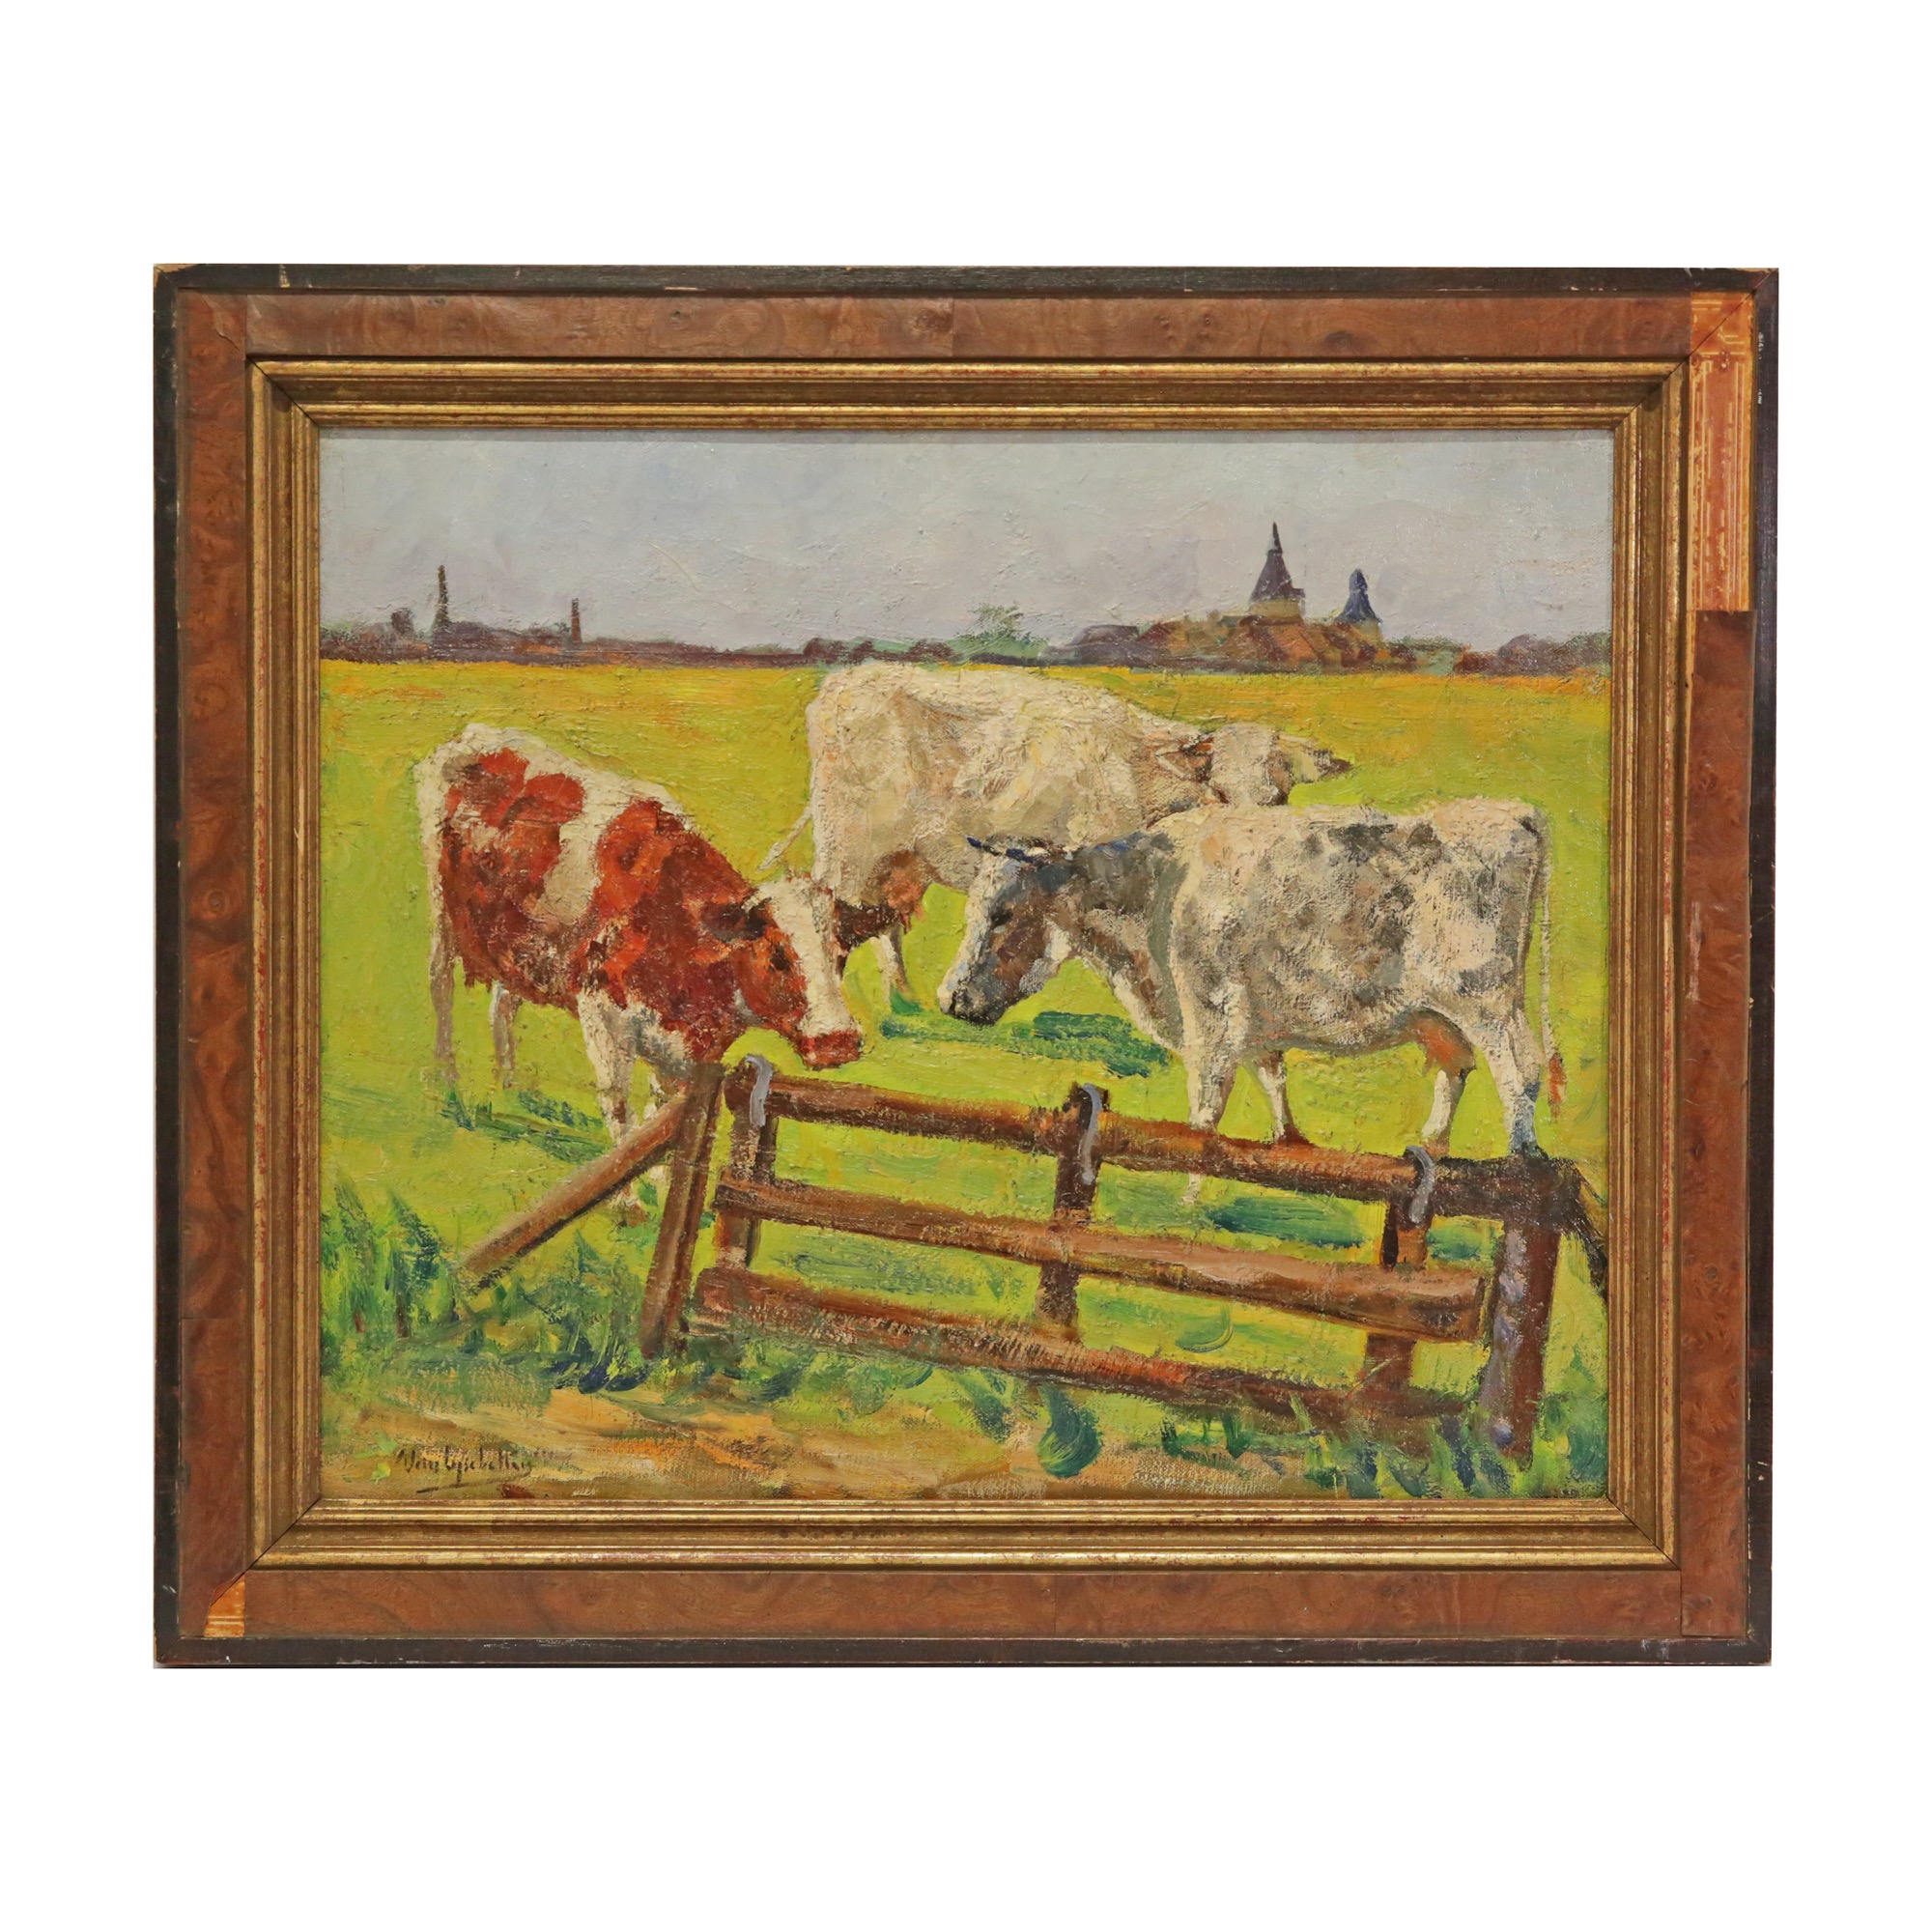 "Cows", oil on canvas, artist"s signature is illegible. French painting of the 20th century.